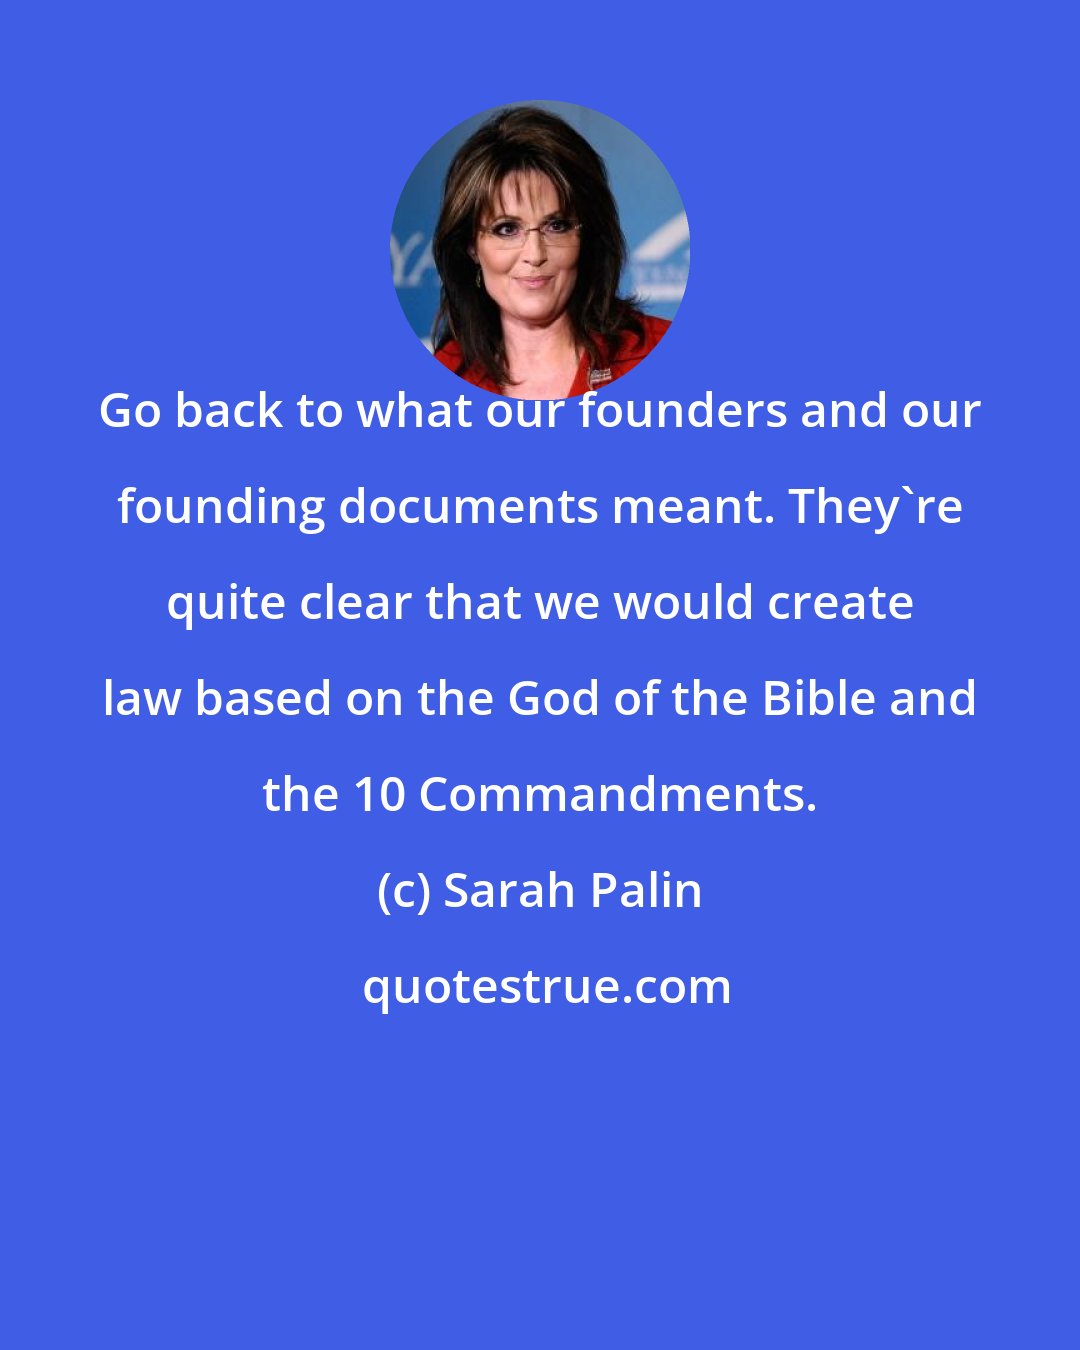 Sarah Palin: Go back to what our founders and our founding documents meant. They're quite clear that we would create law based on the God of the Bible and the 10 Commandments.